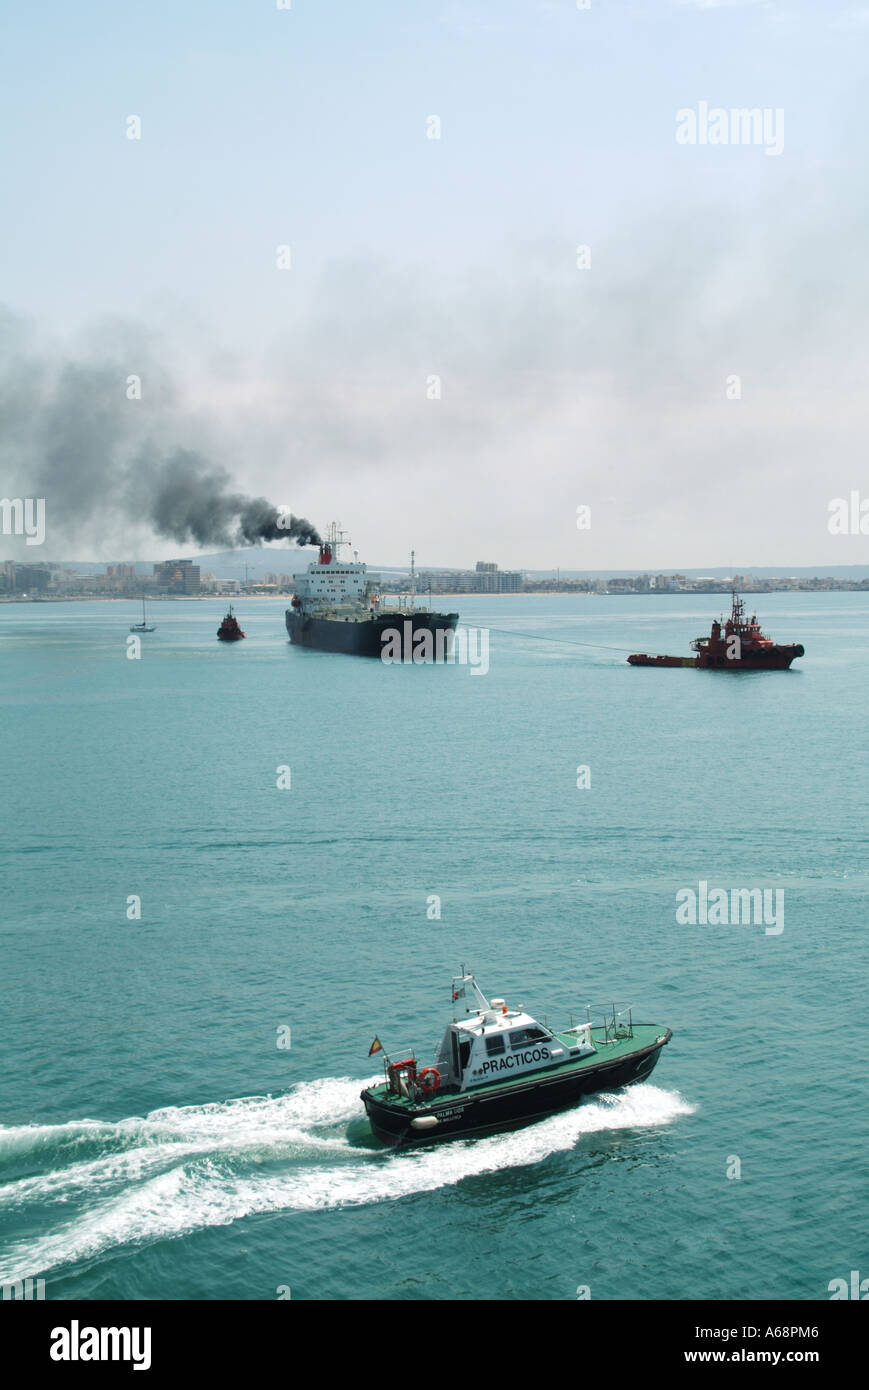 Cargo ship belching out black smoke & soot emissions from funnel polluting local atmosphere & environment arriving at Port of Palma Mallorca Spain Stock Photo